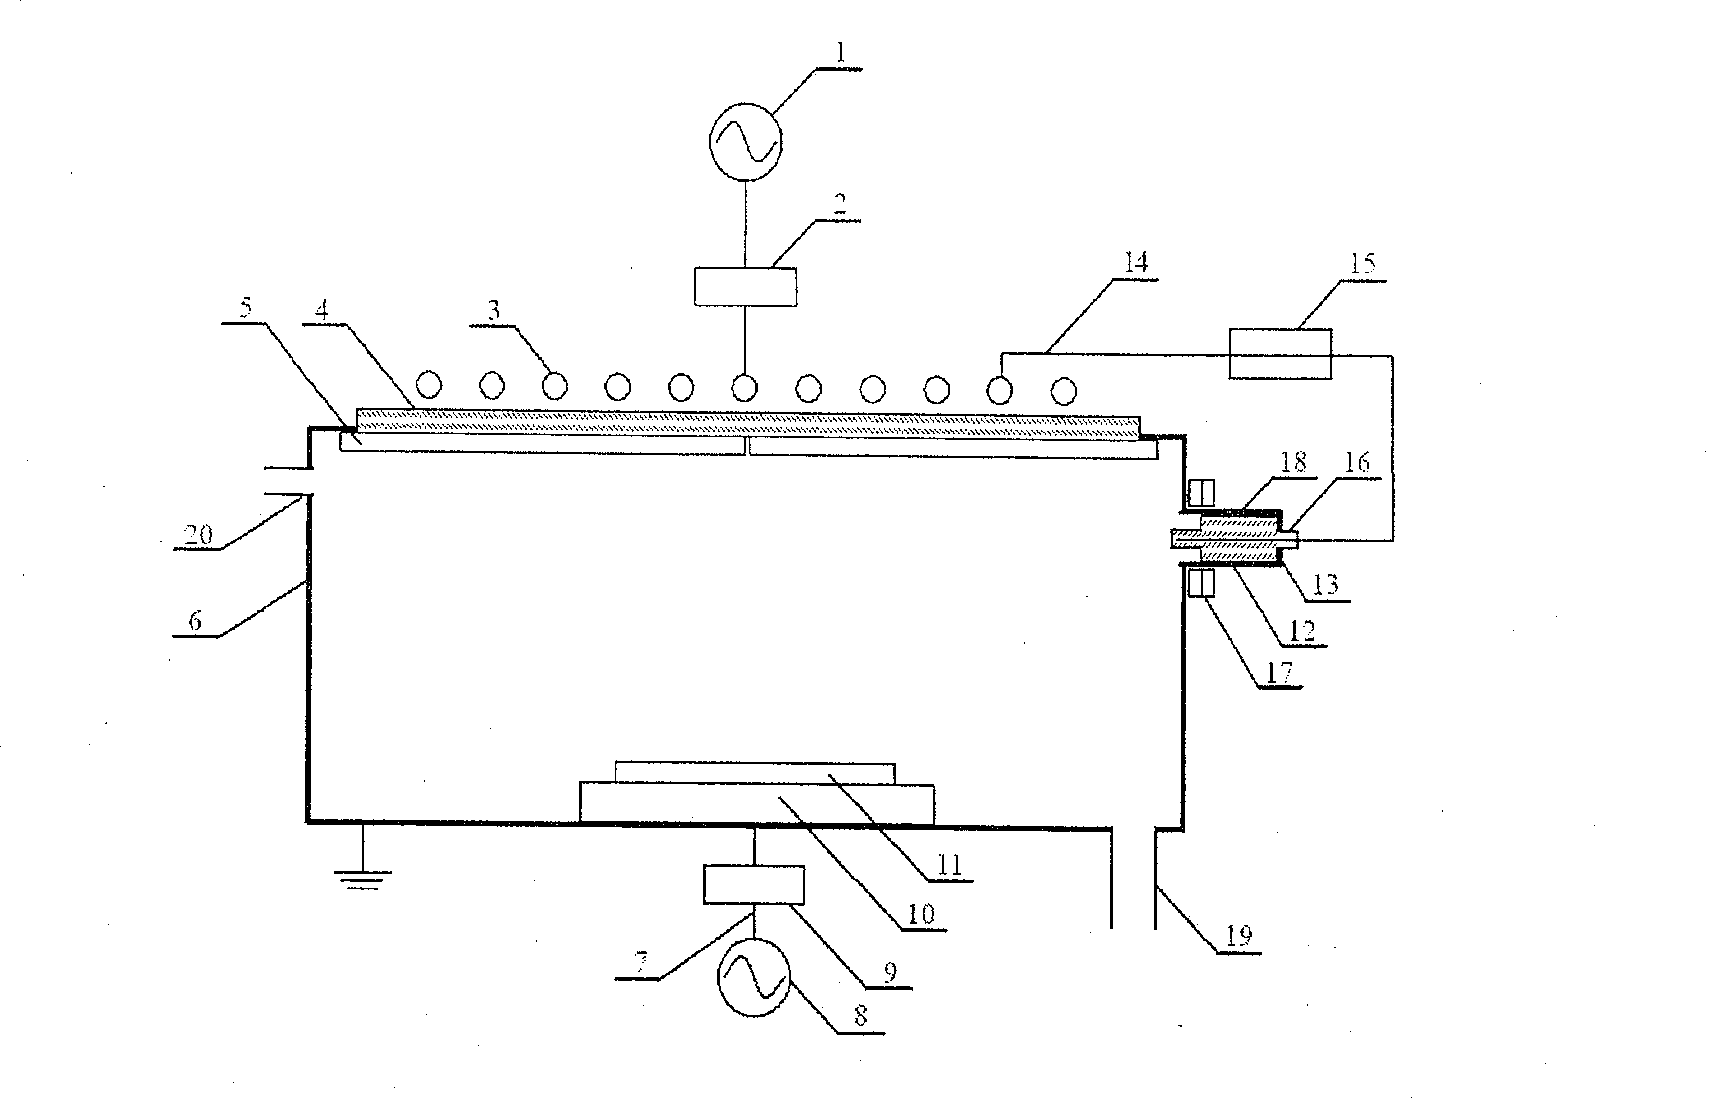 Plane Faraday screening system of radio frequency inductive coupled plasma source